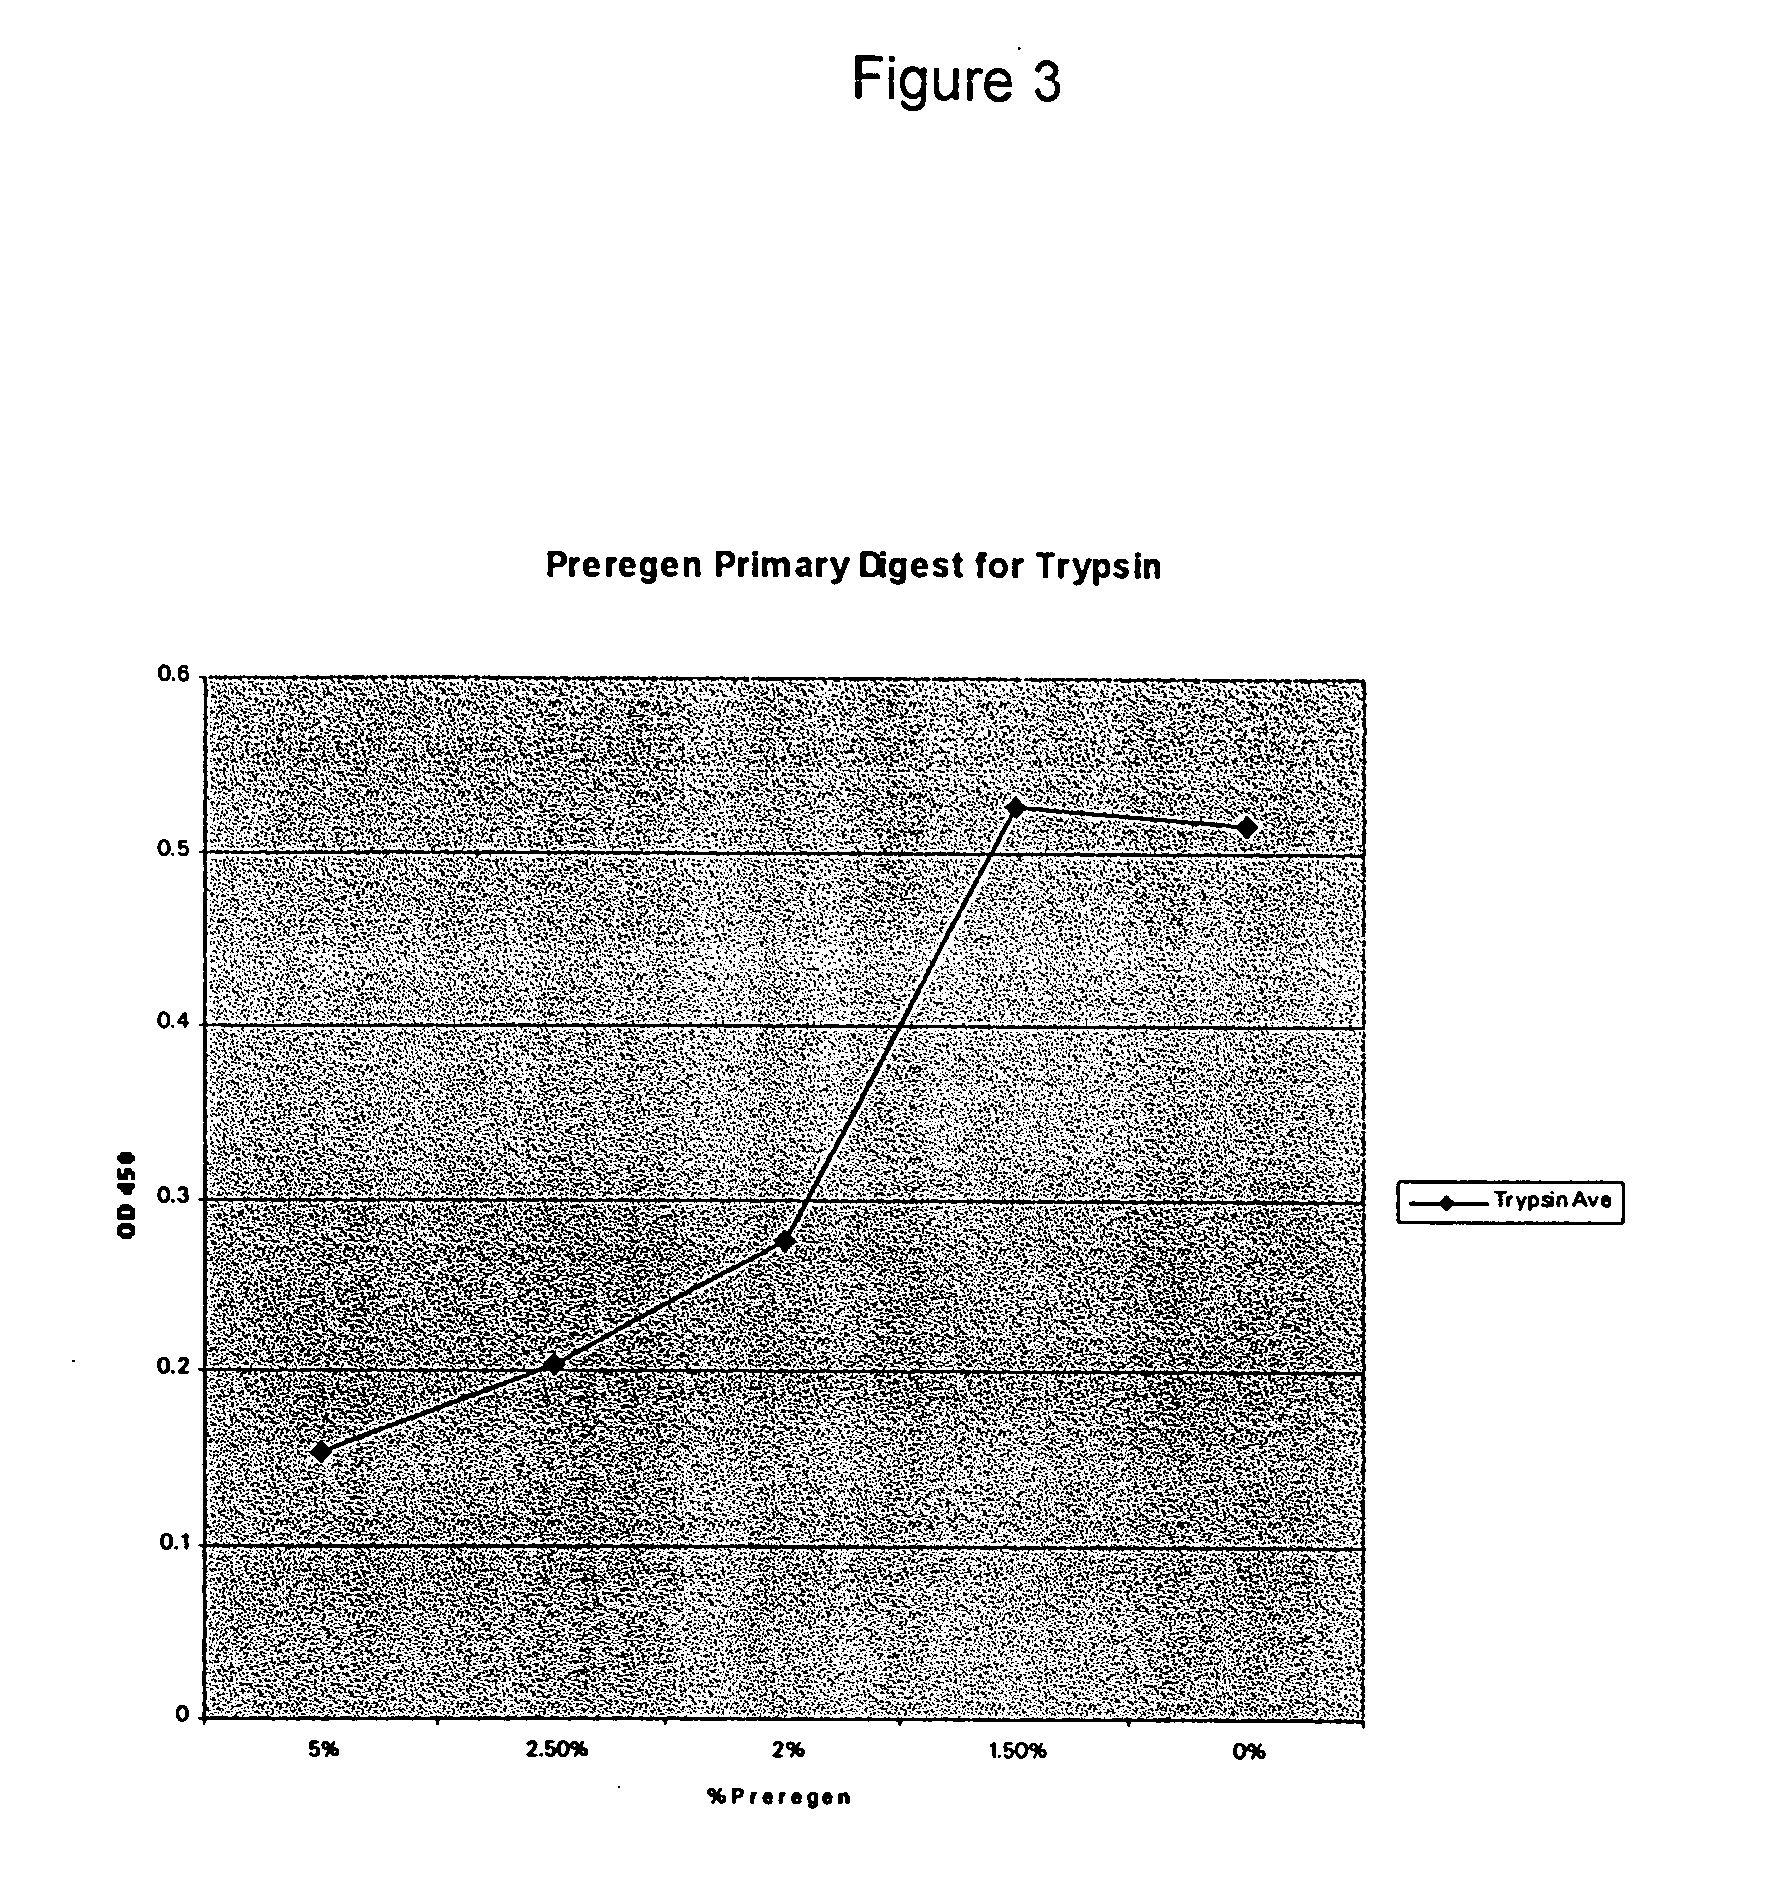 Protease inhibitor compositions for prevention and treatment of skin conditions